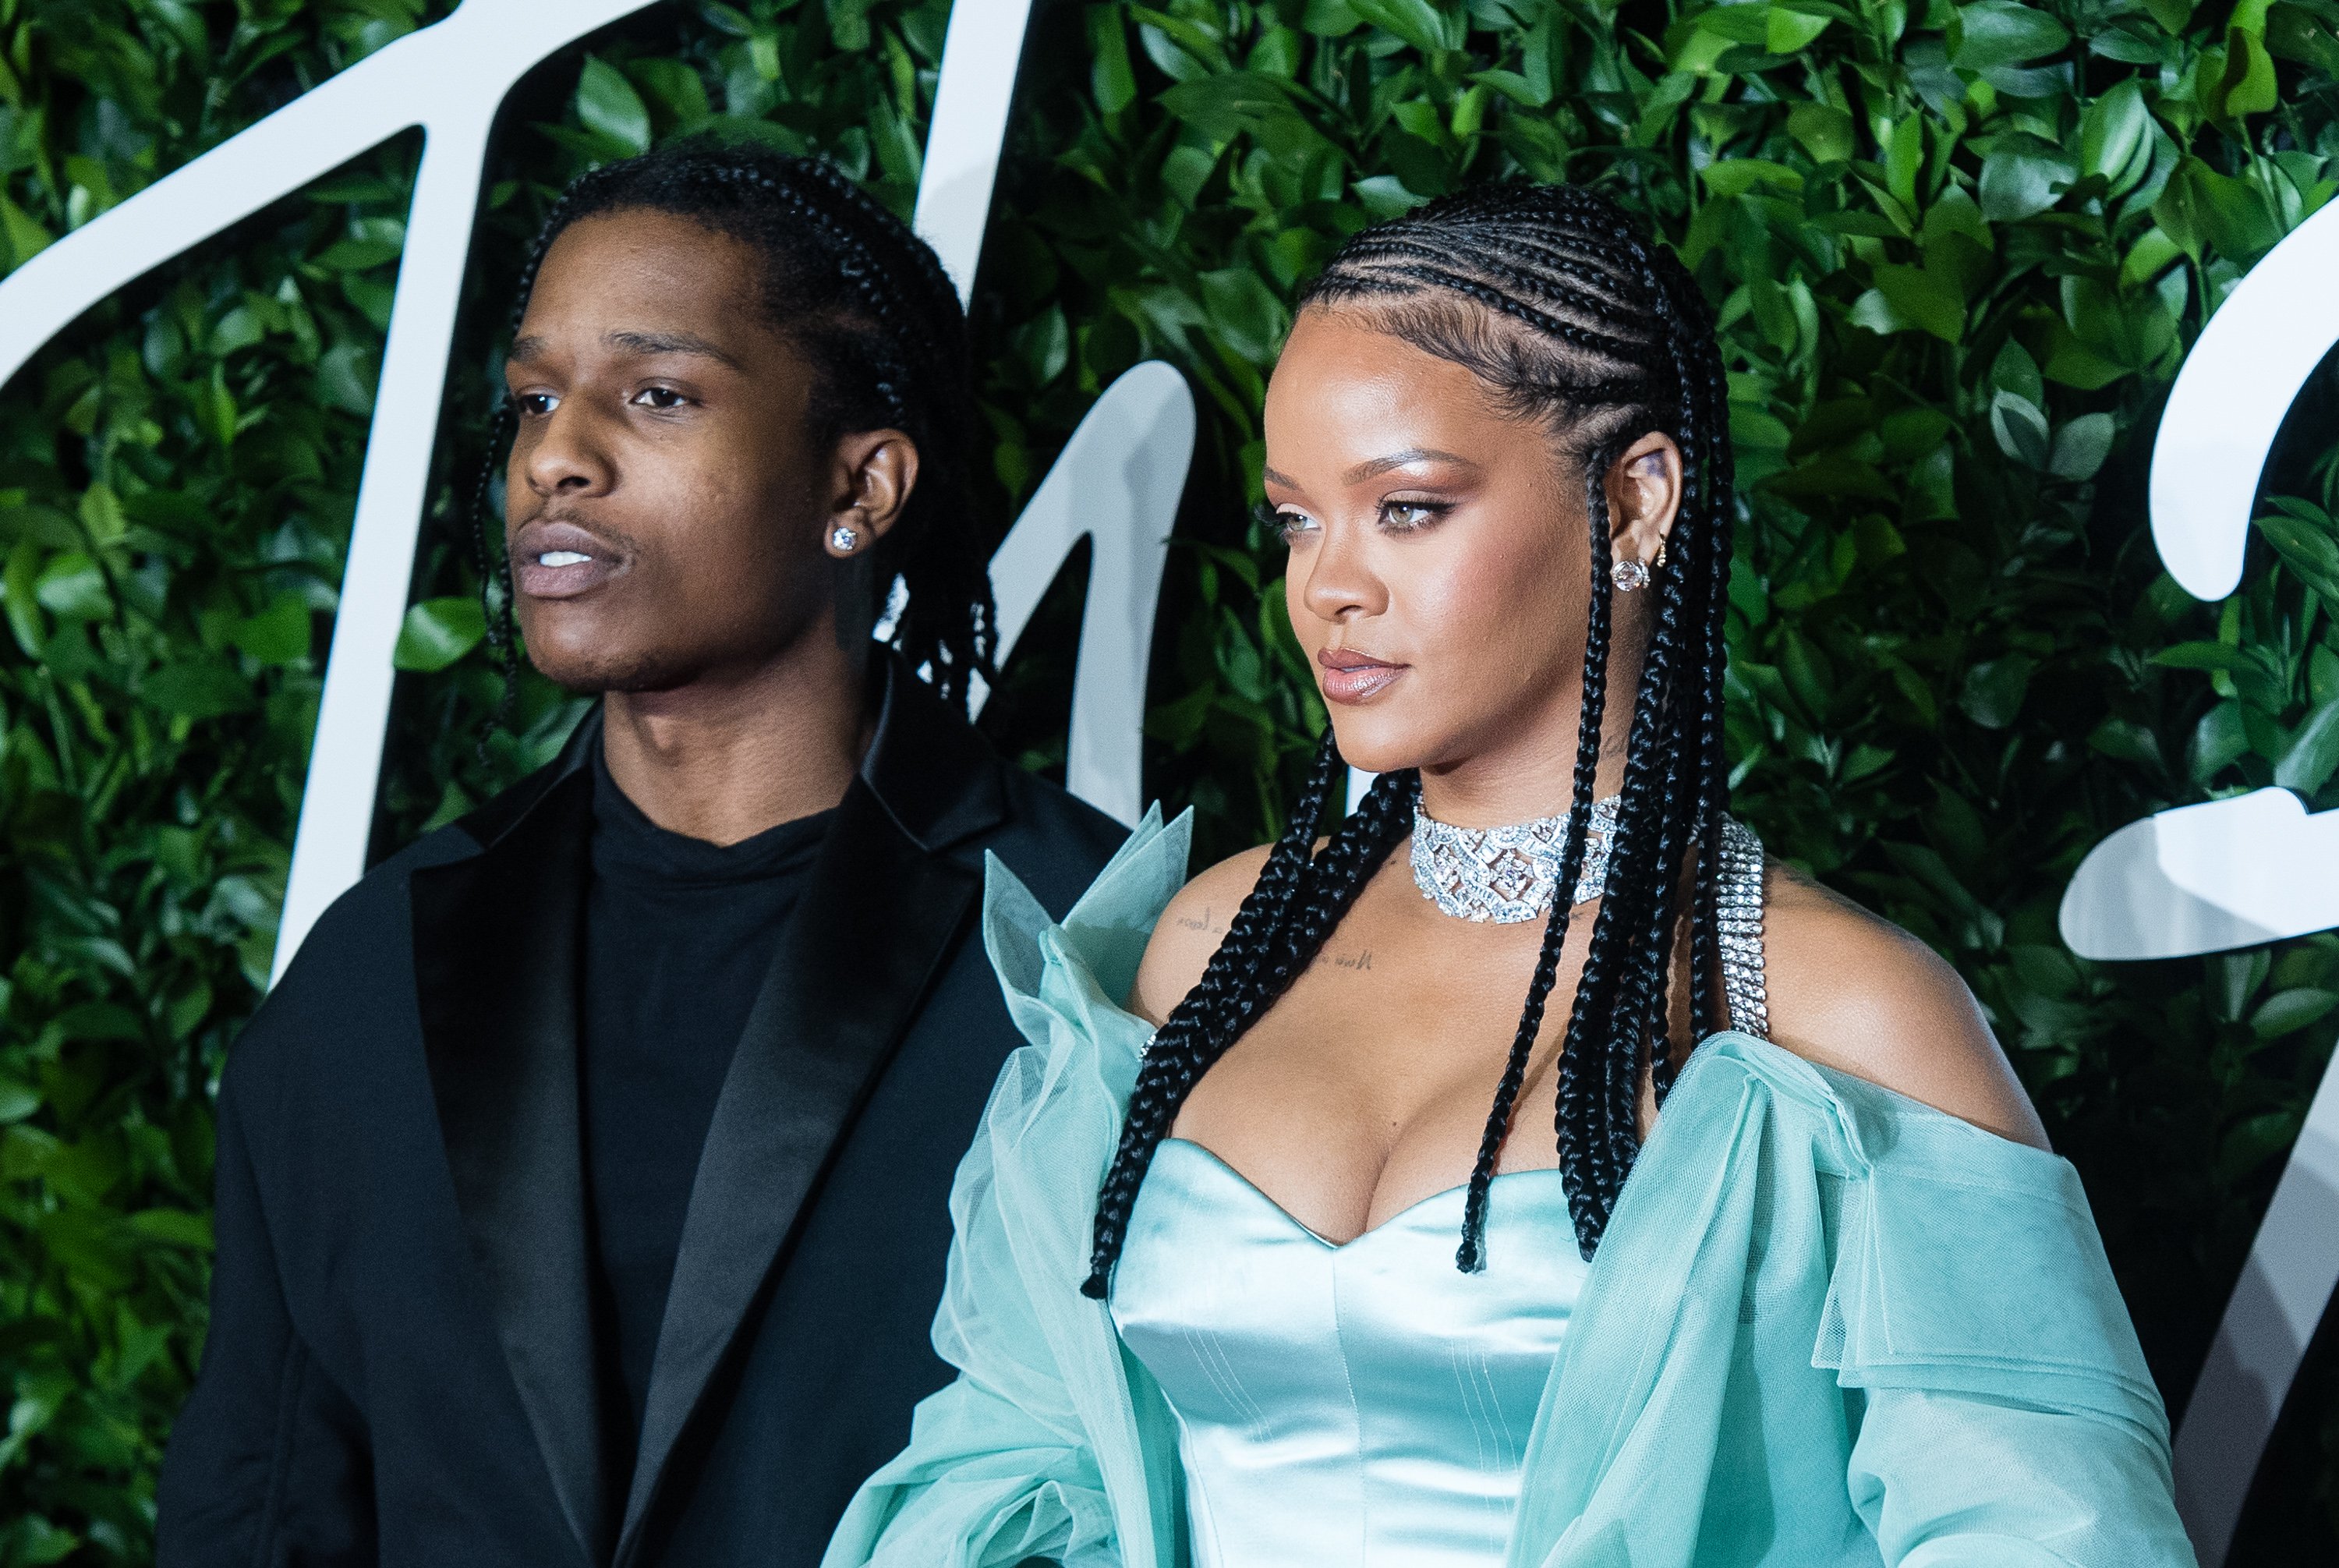 ASAP Rocky and Rihanna on the red carpet.